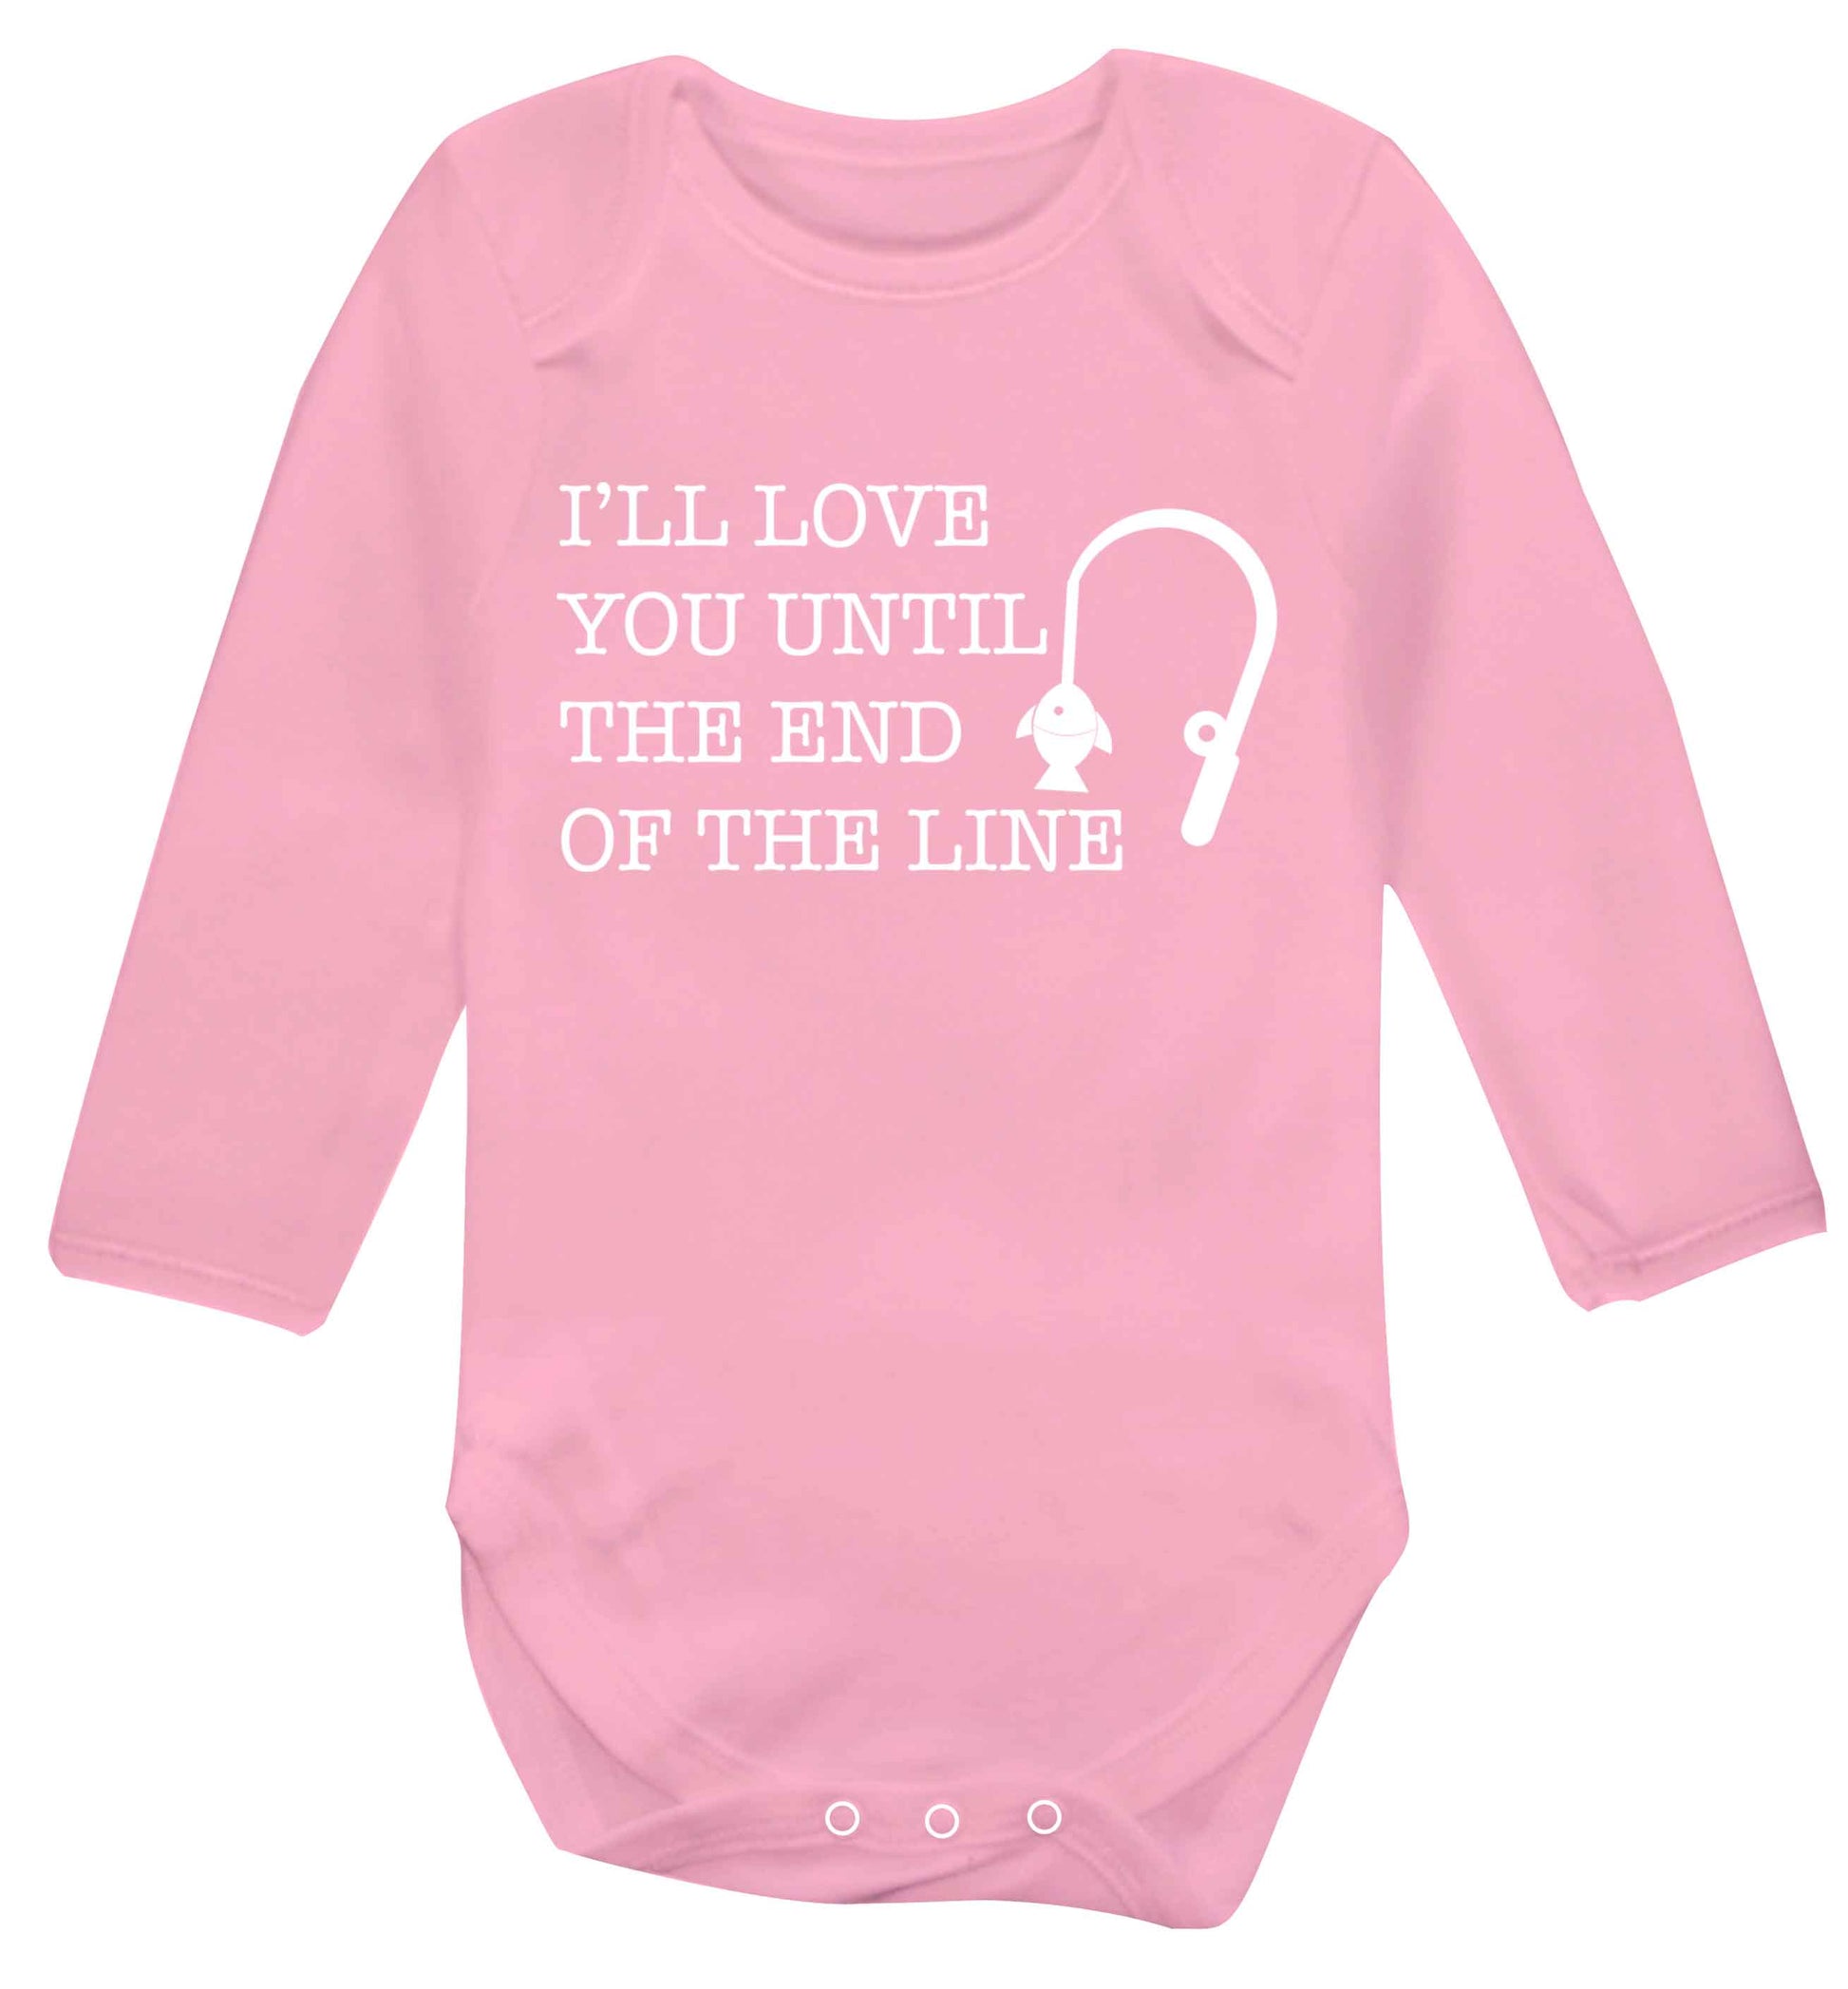 I'll love you until the end of the line Baby Vest long sleeved pale pink 6-12 months